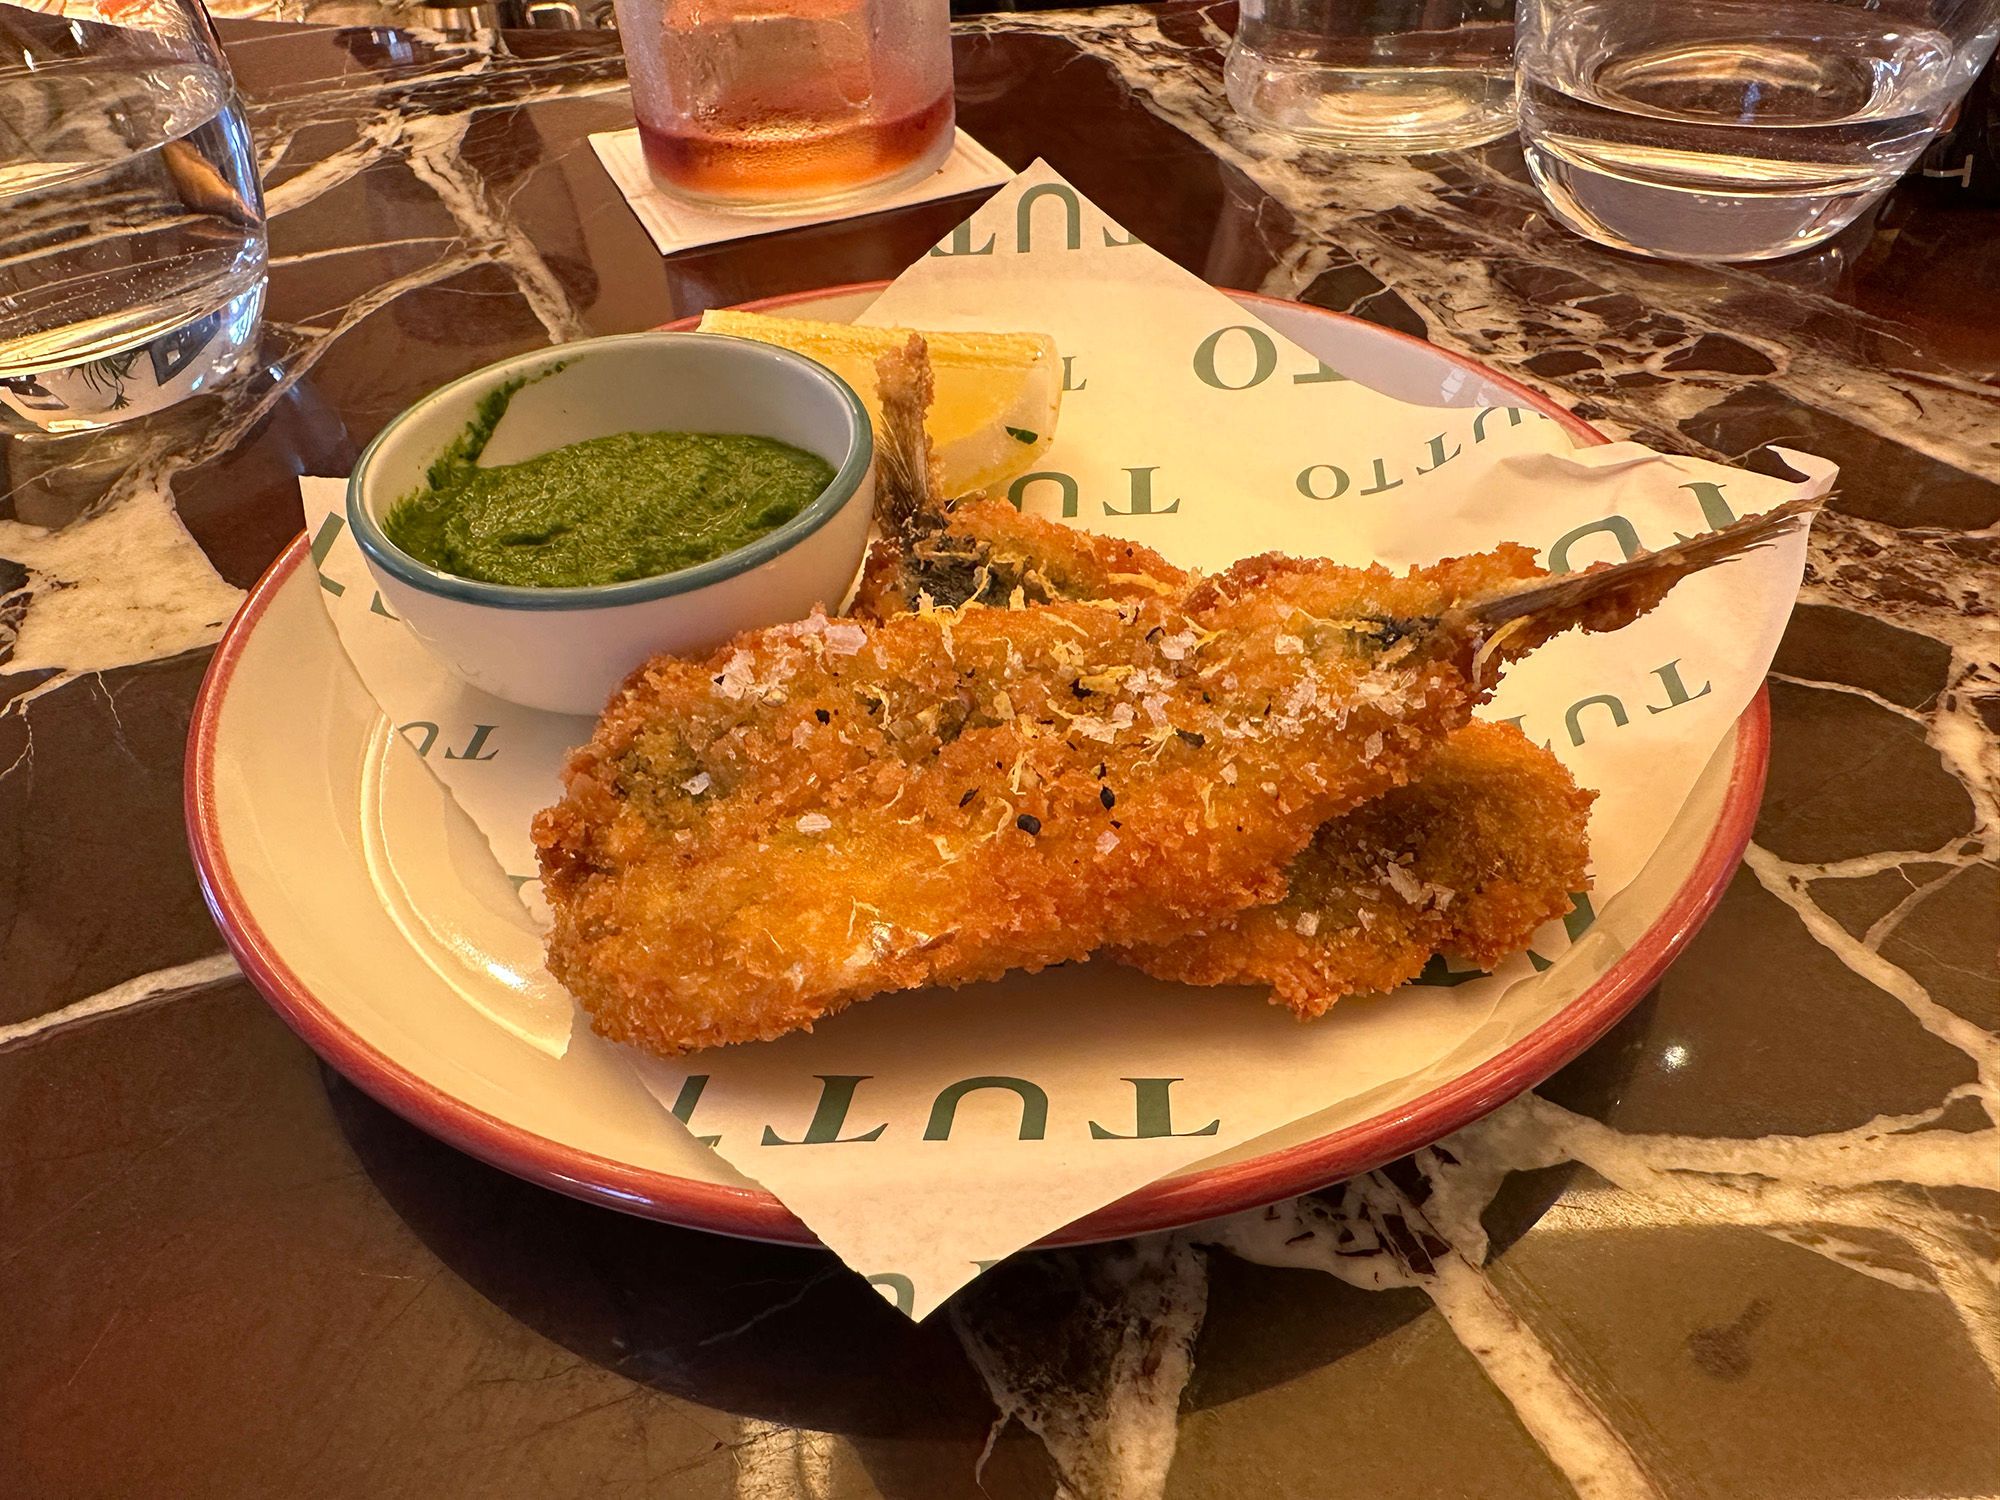 A plate of sardines with a herb dip served on a small plate with Tutto branded paper for the Italian sharing menu.